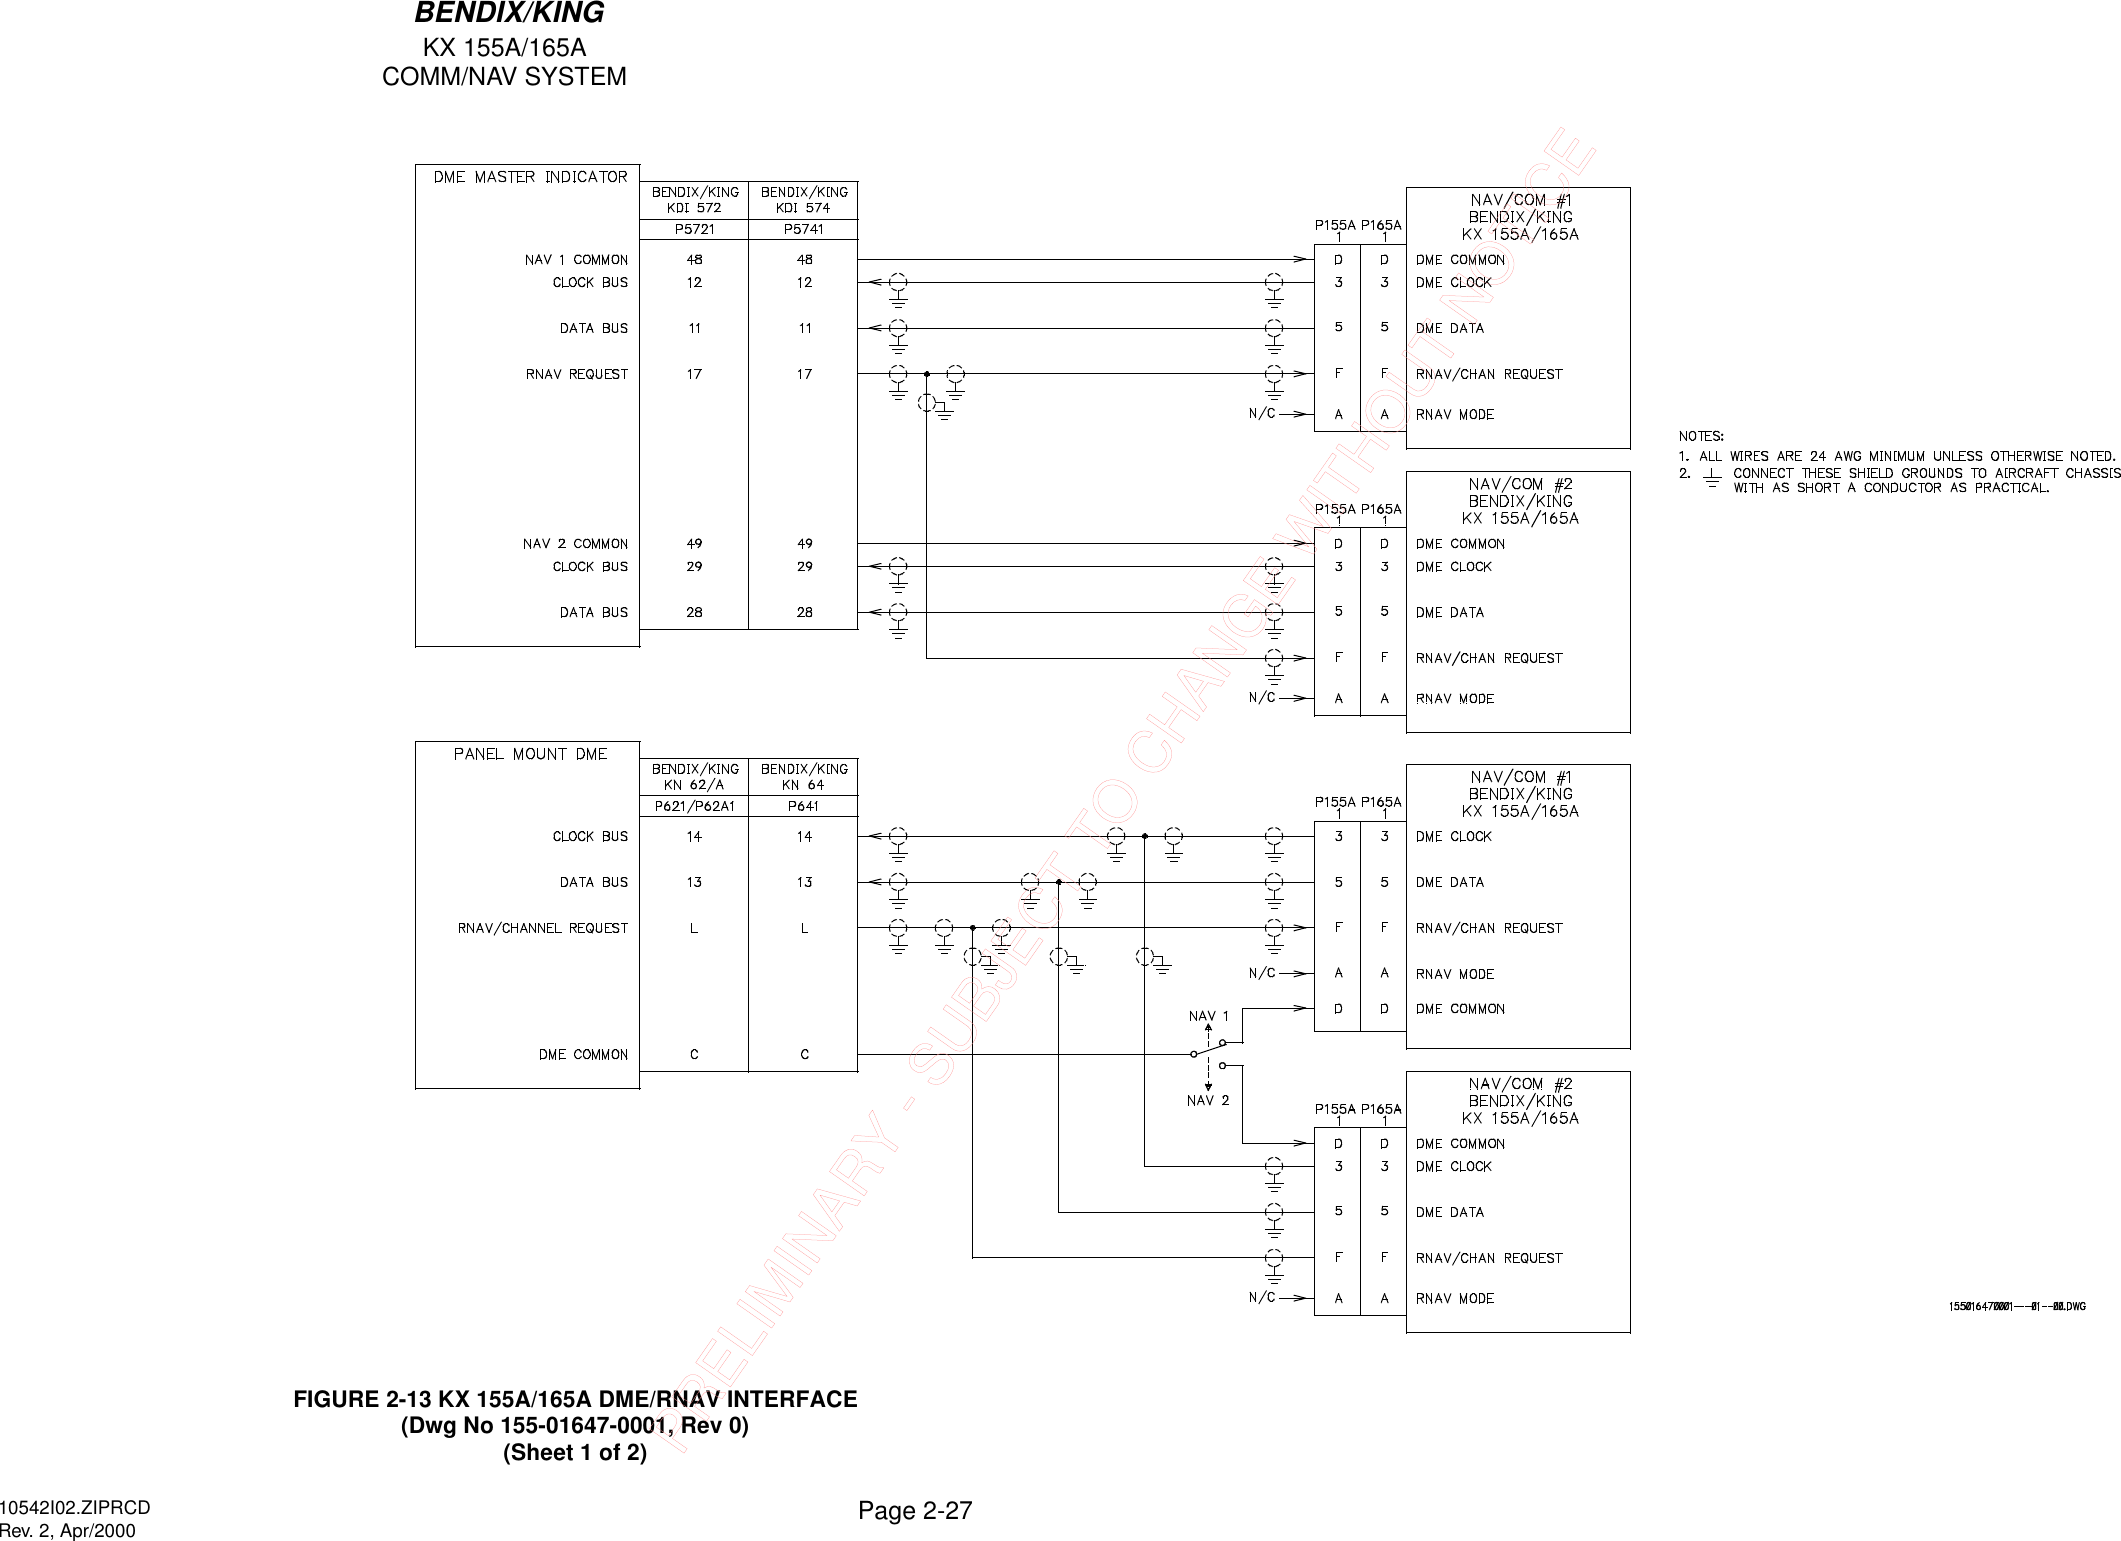 KX 155A/165ACOMM/NAV SYSTEMPage 2-27BENDIX/KING10542I02.ZIPRCDRev. 2, Apr/2000FIGURE 2-13 KX 155A/165A DME/RNAV INTERFACE(Dwg No 155-01647-0001, Rev 0)(Sheet 1 of 2)PRELIMINARY - SUBJECT TO CHANGE WITHOUT NOTICE